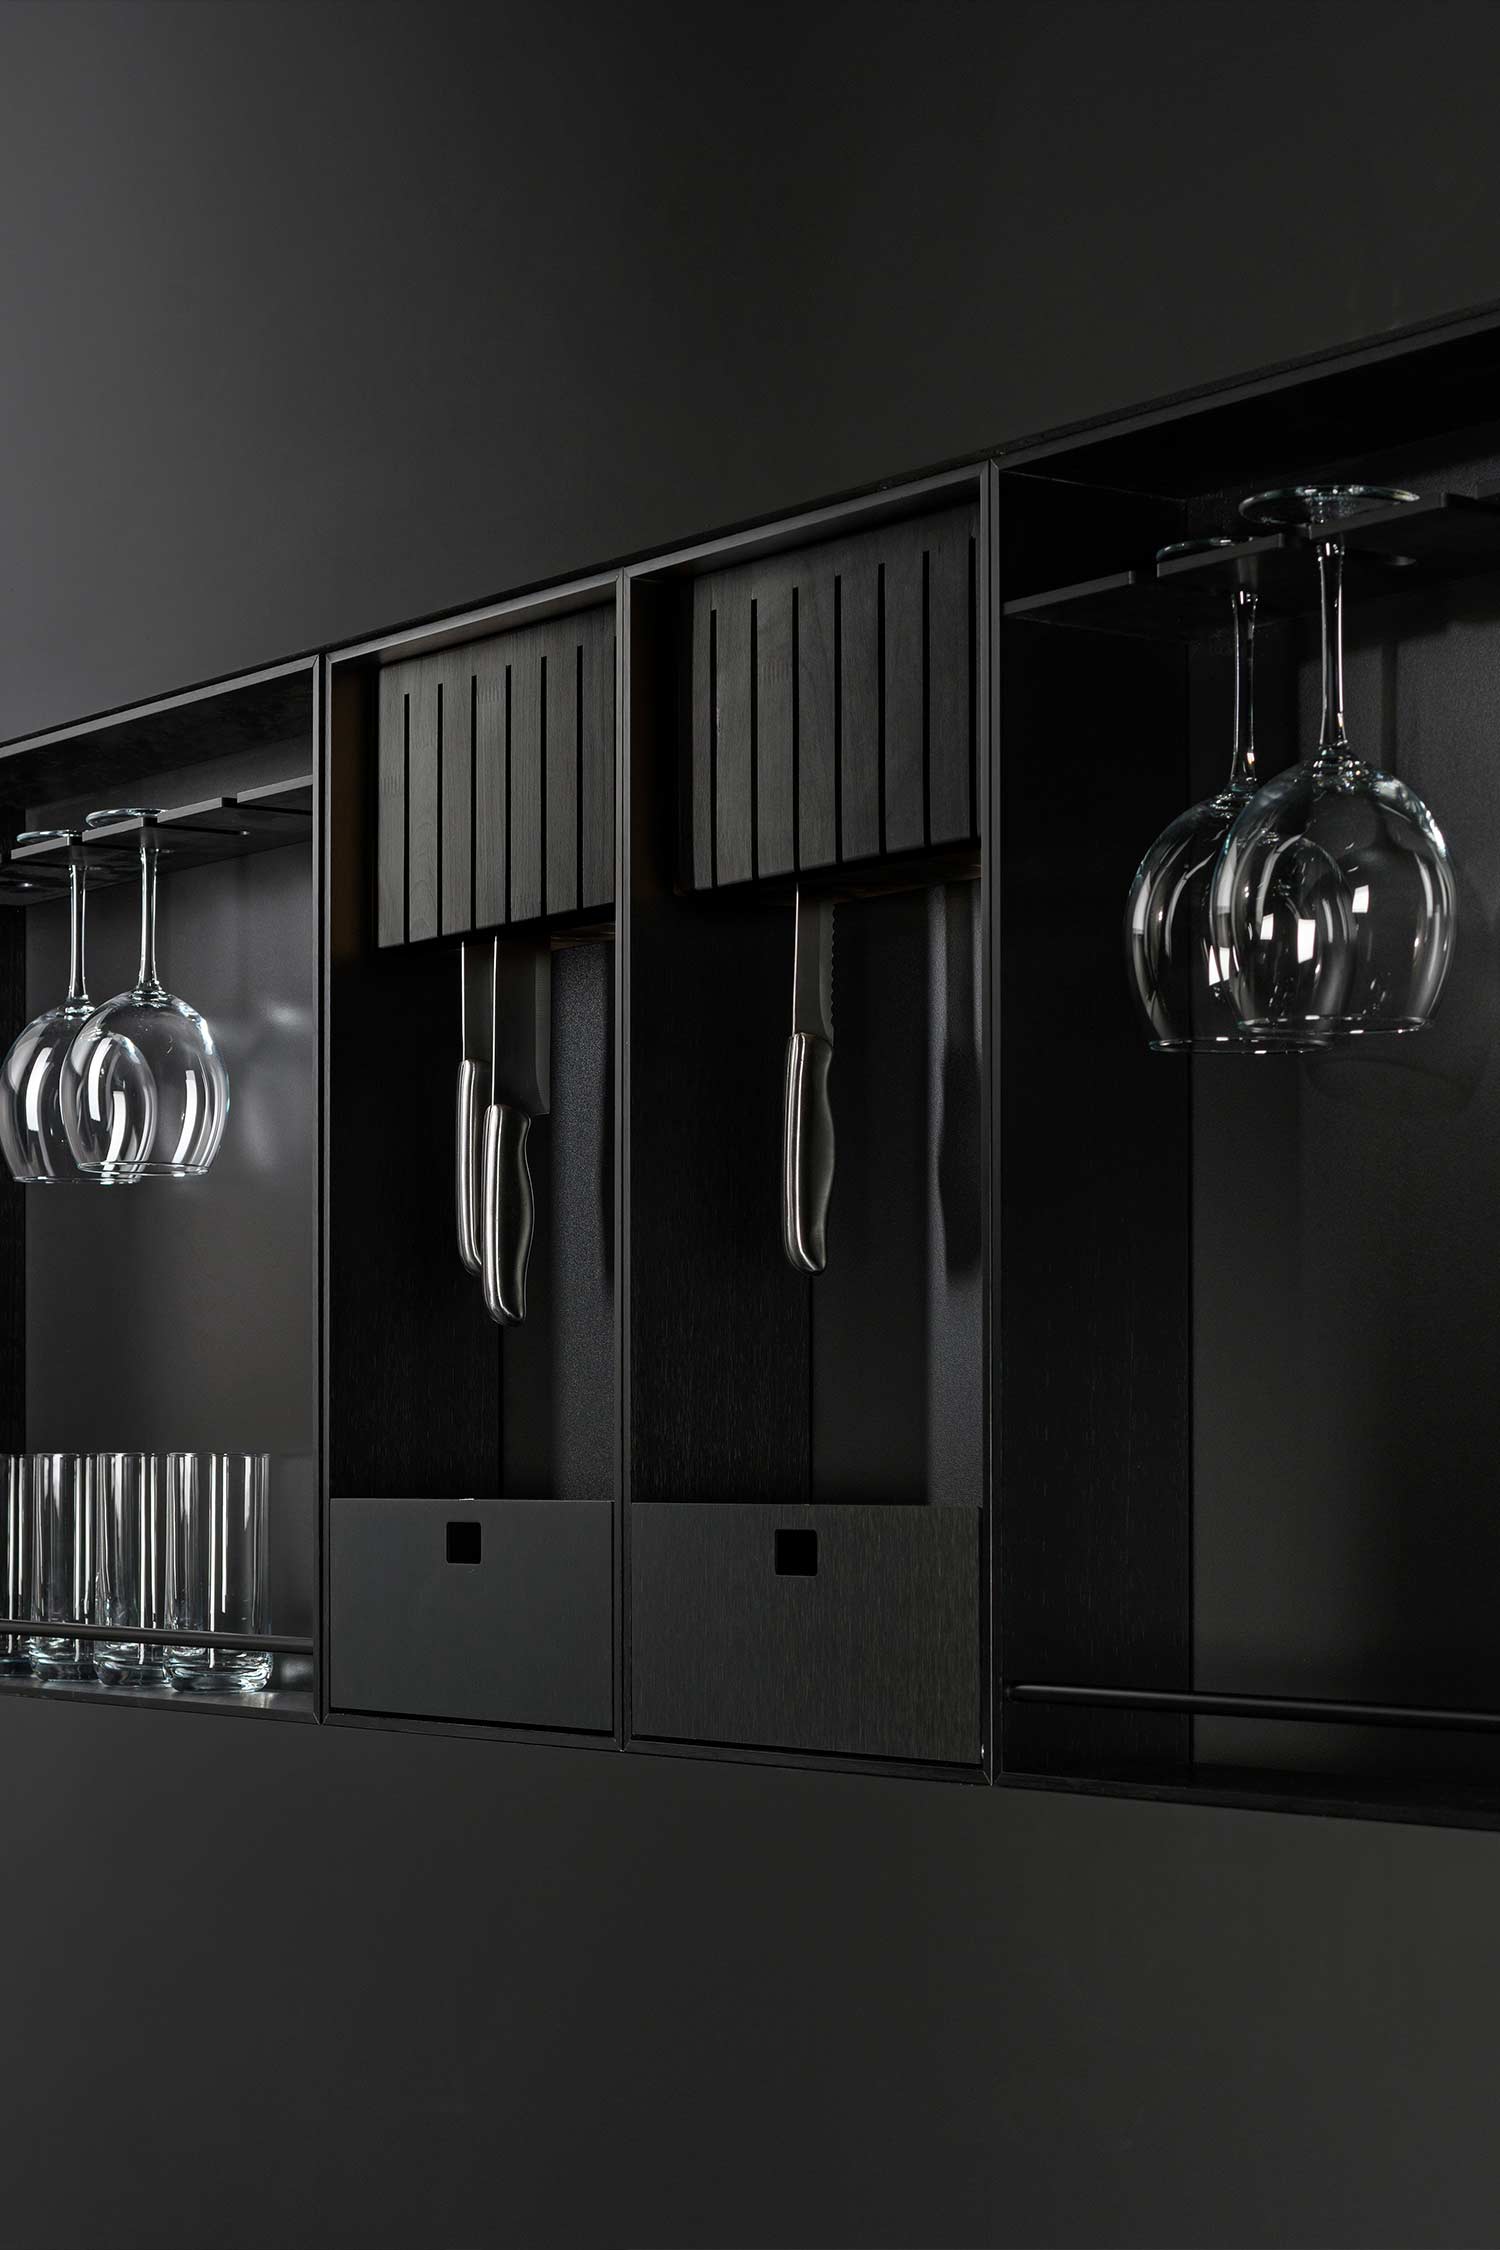 Modular elements build a exposed metal wall mounted storage unit for glassware, cooking knives and serveware.